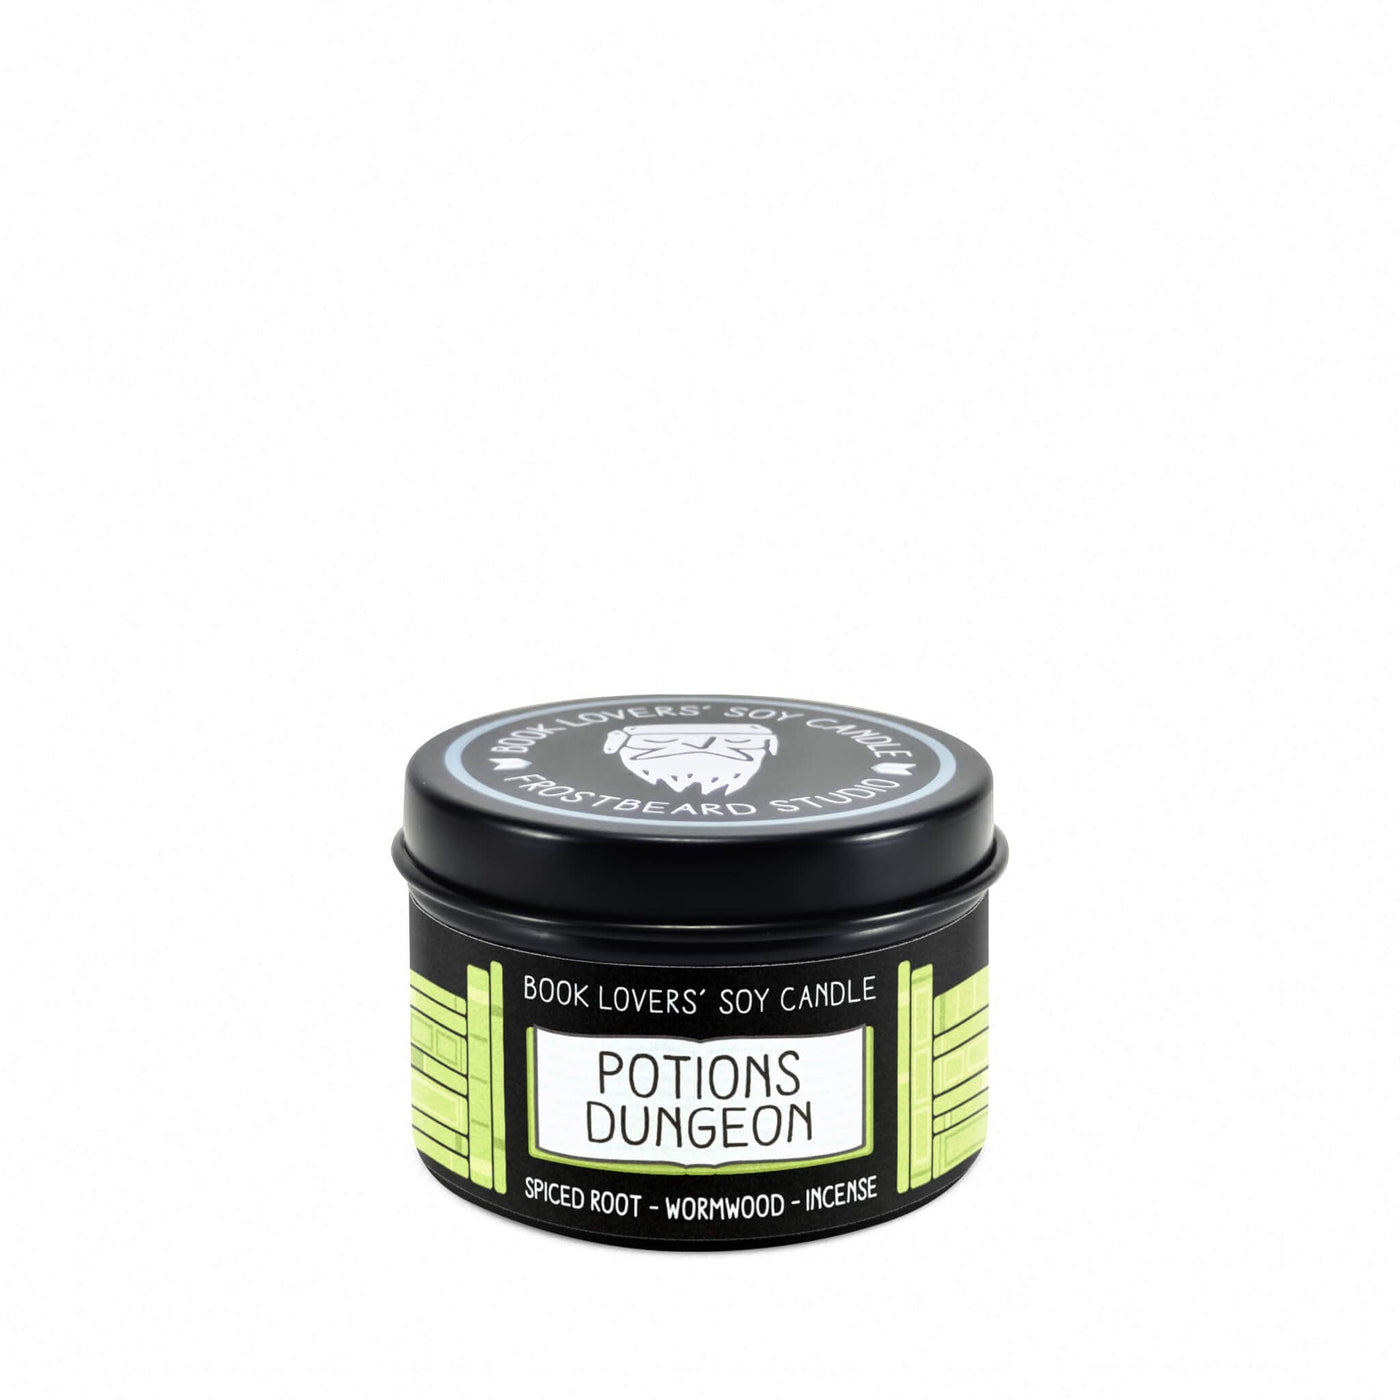 Potions Dungeon - 2 oz Tin - Book Lovers' Soy Candle - Frostbeard Studio